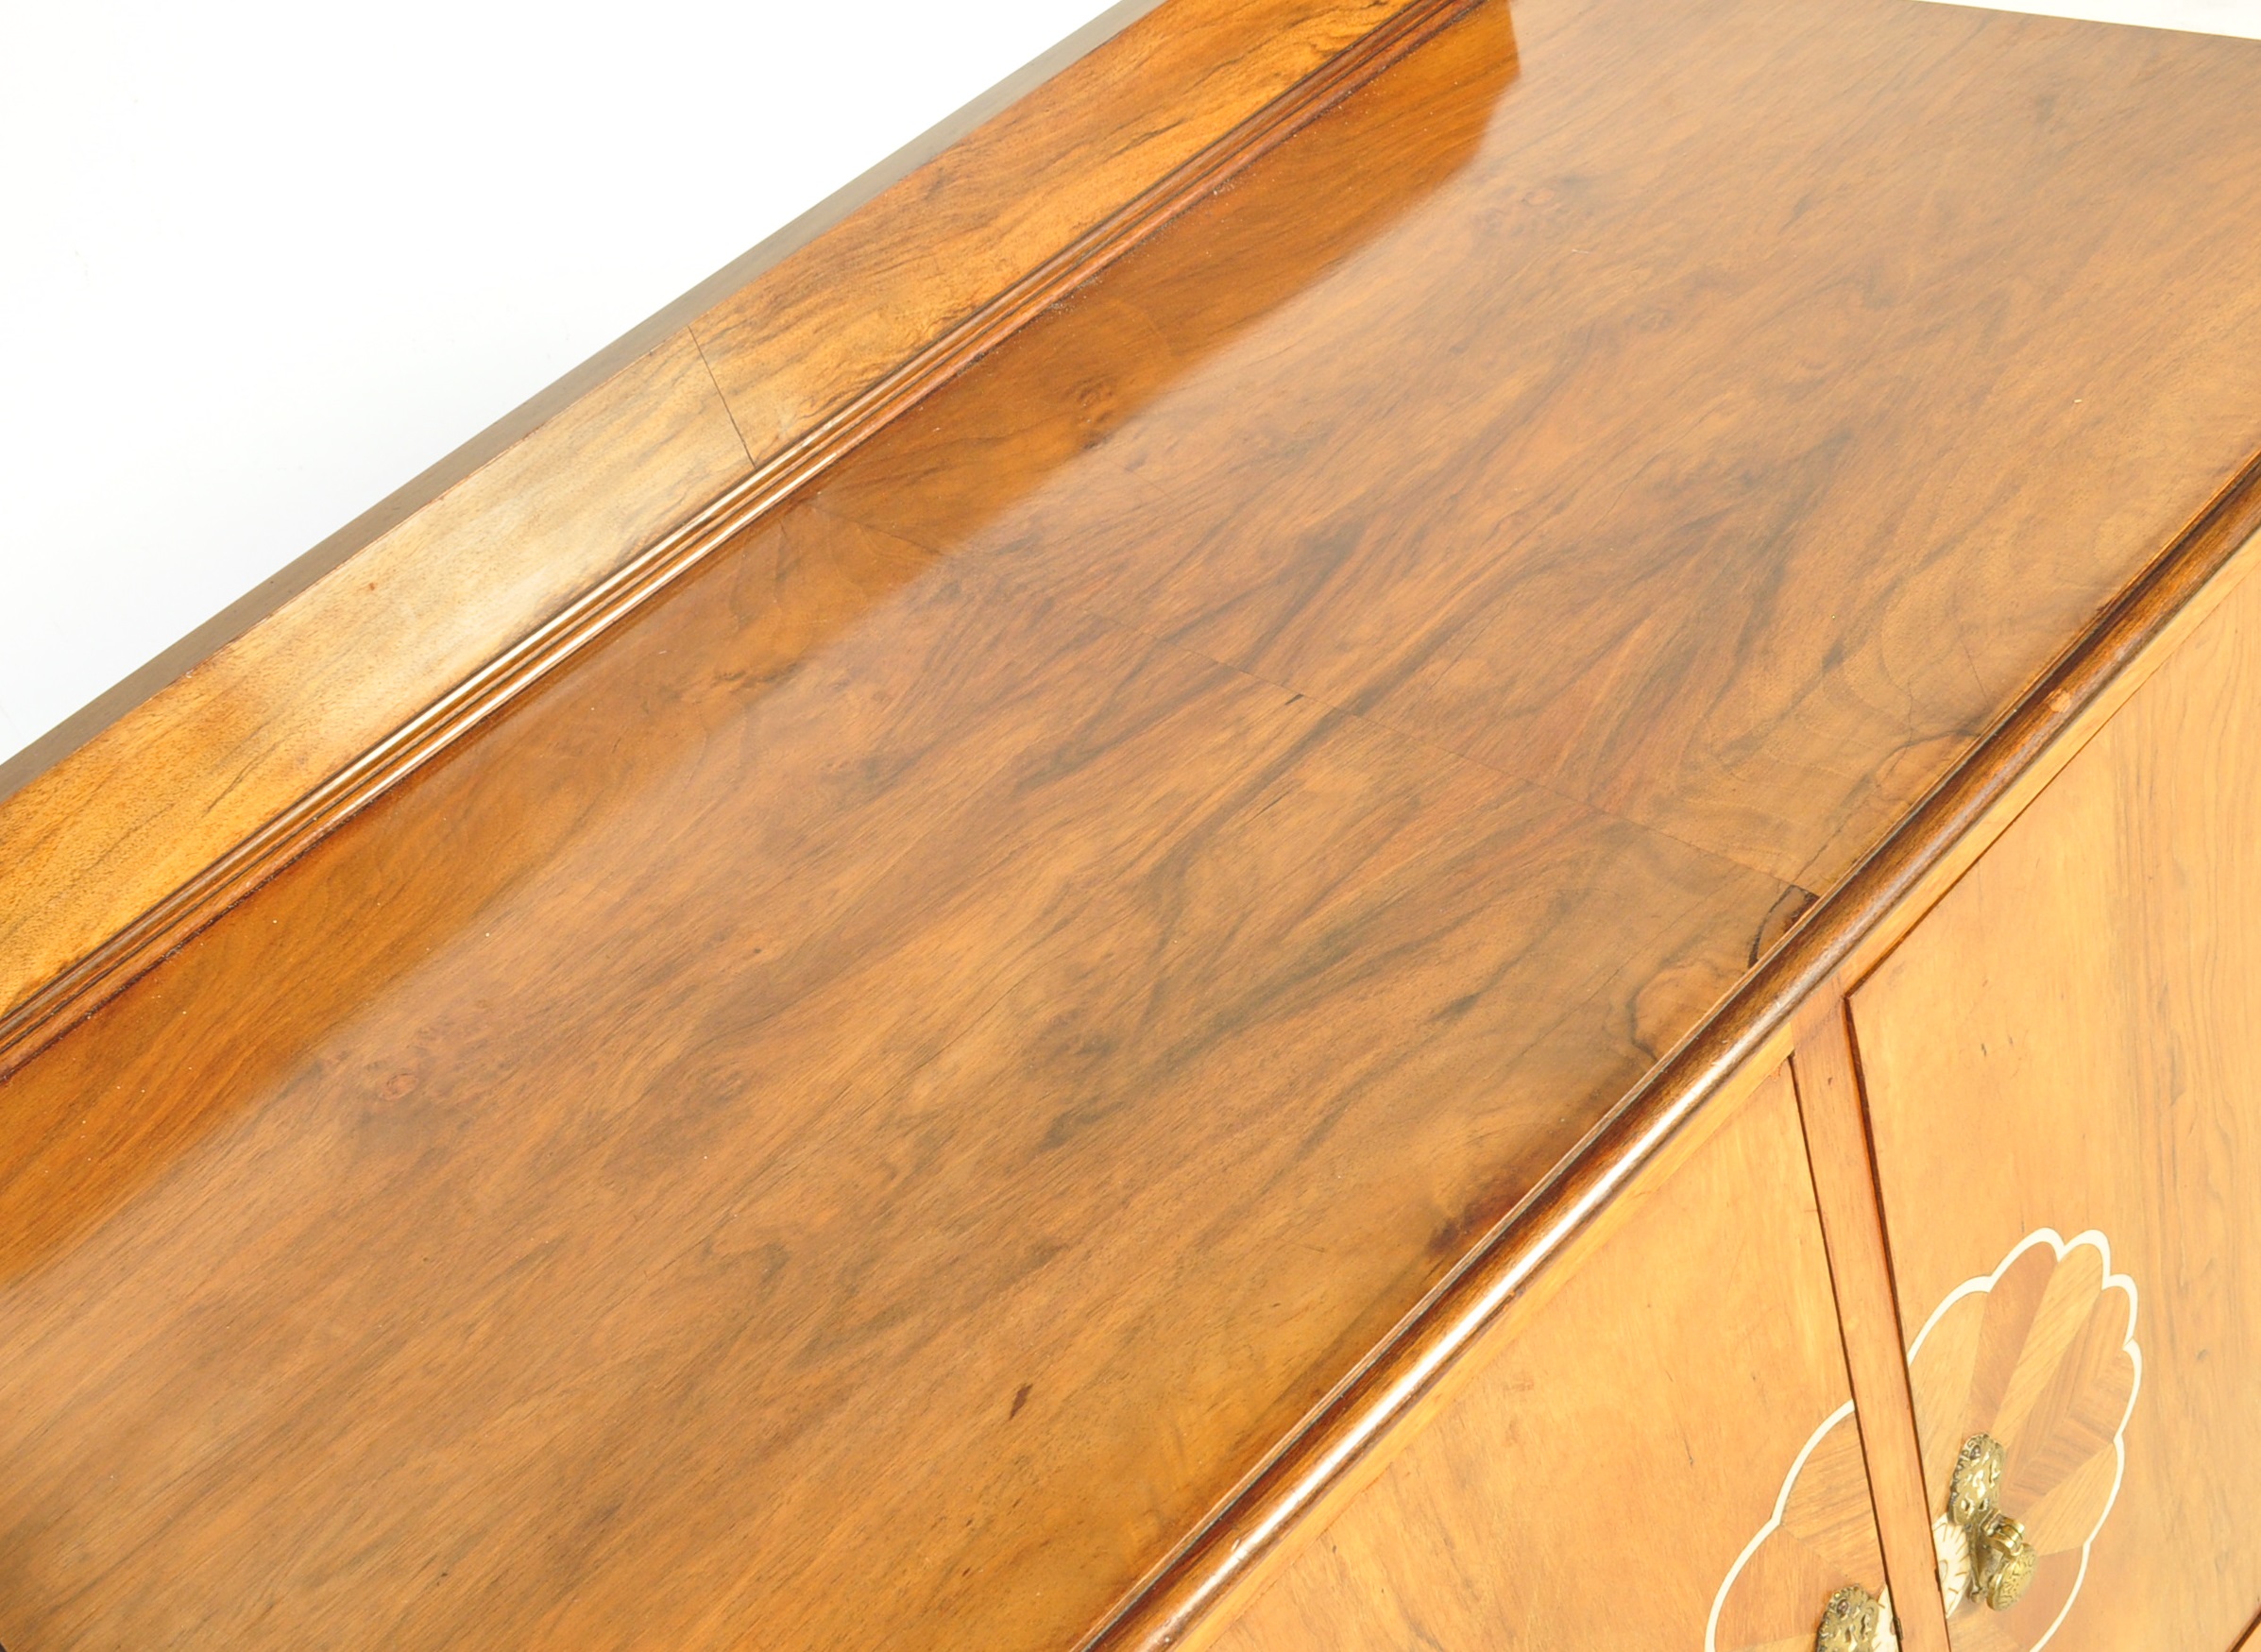 ART DECO 1930S WALNUT TALLBOY CHEST OF DRAWERS - Image 3 of 9